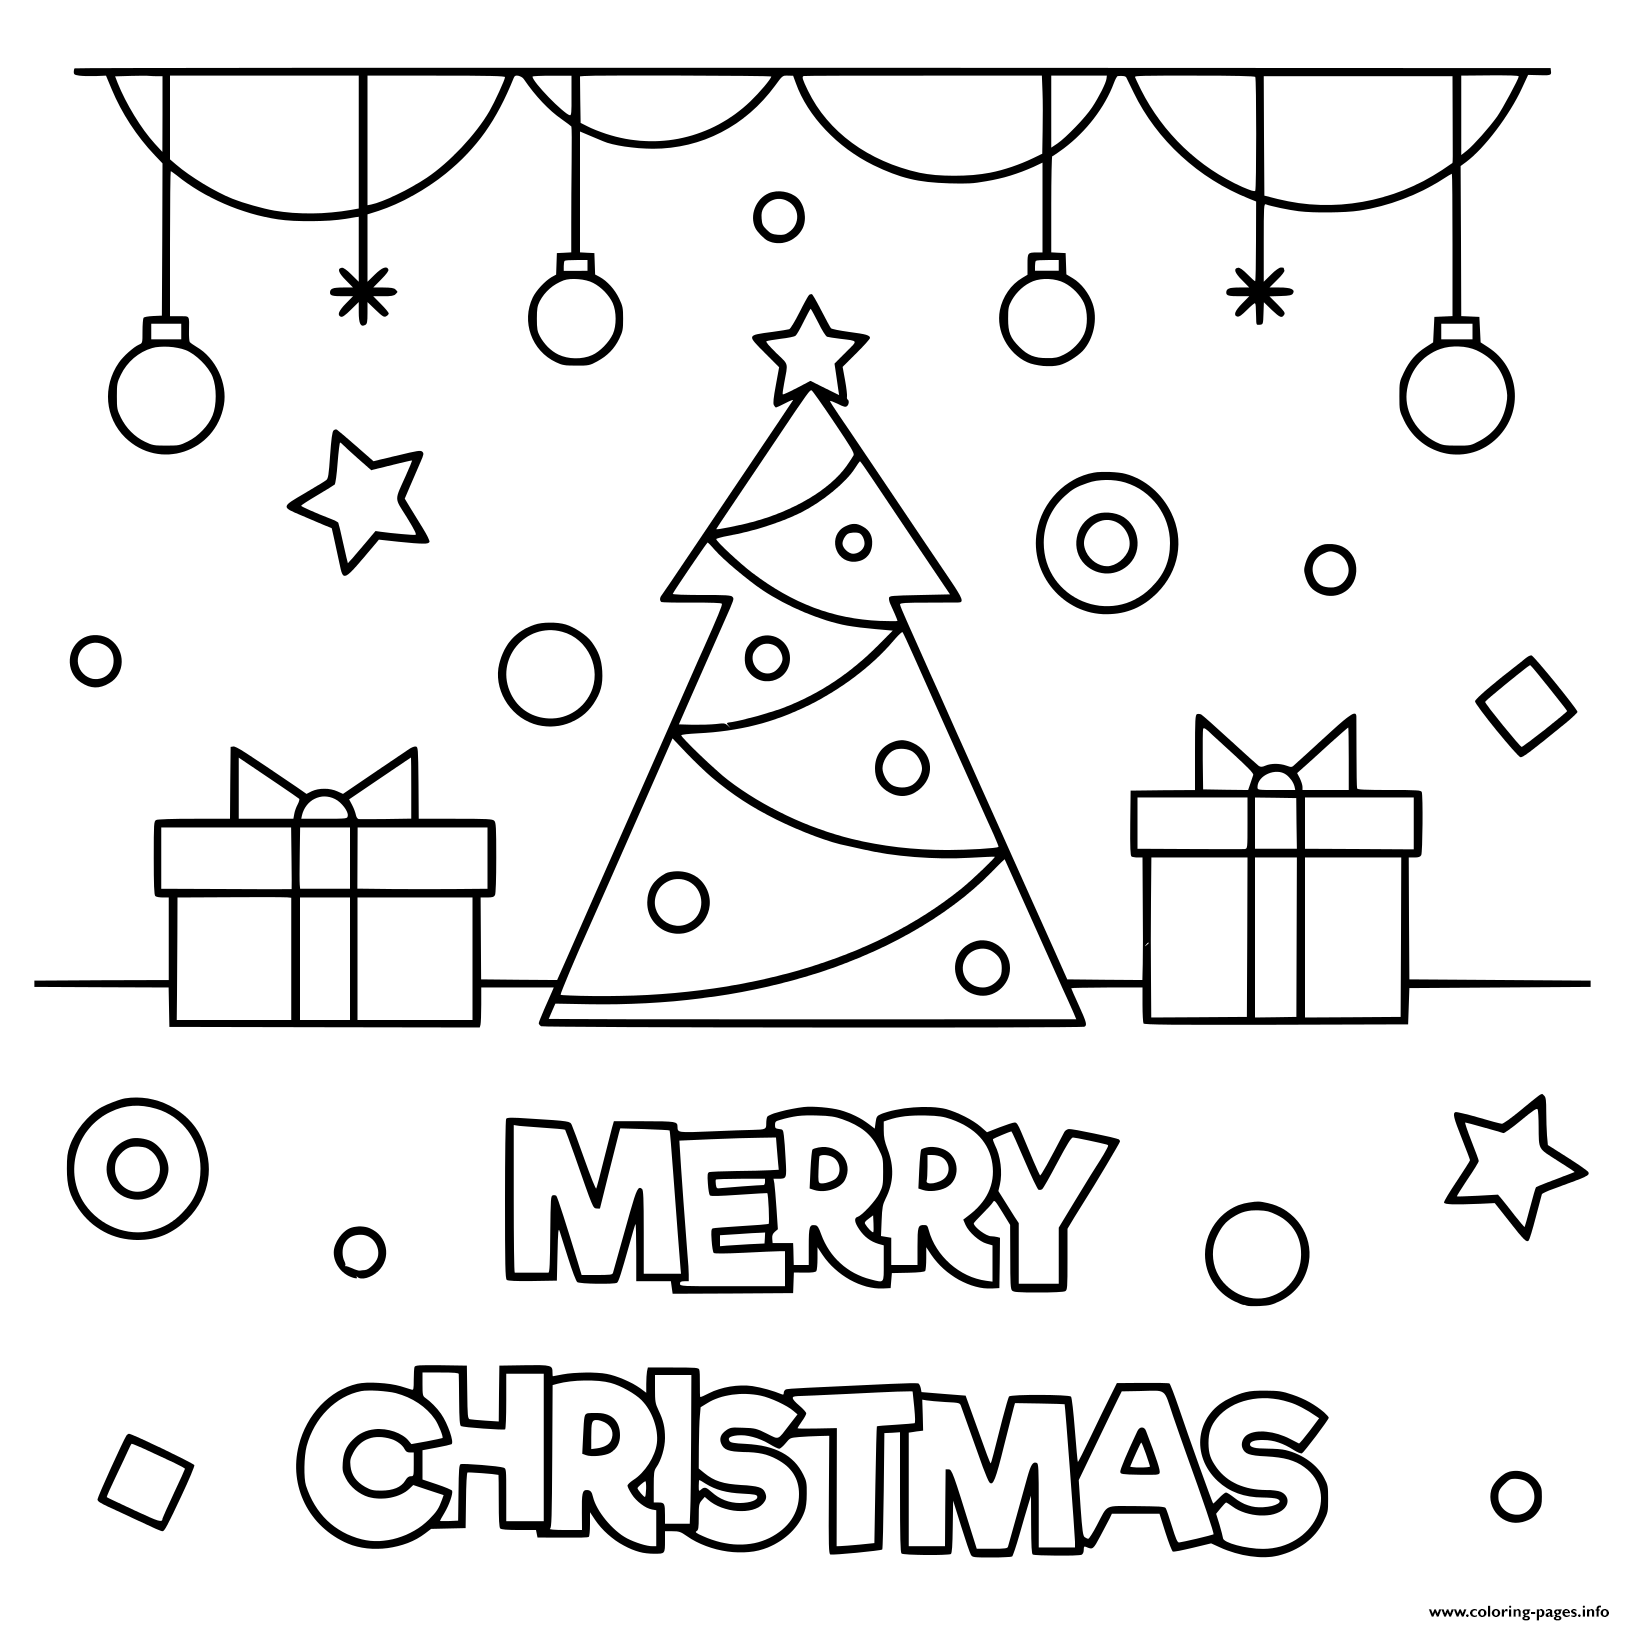 Merry Christmas Tree With Decorations December 24 Coloring Pages Printable